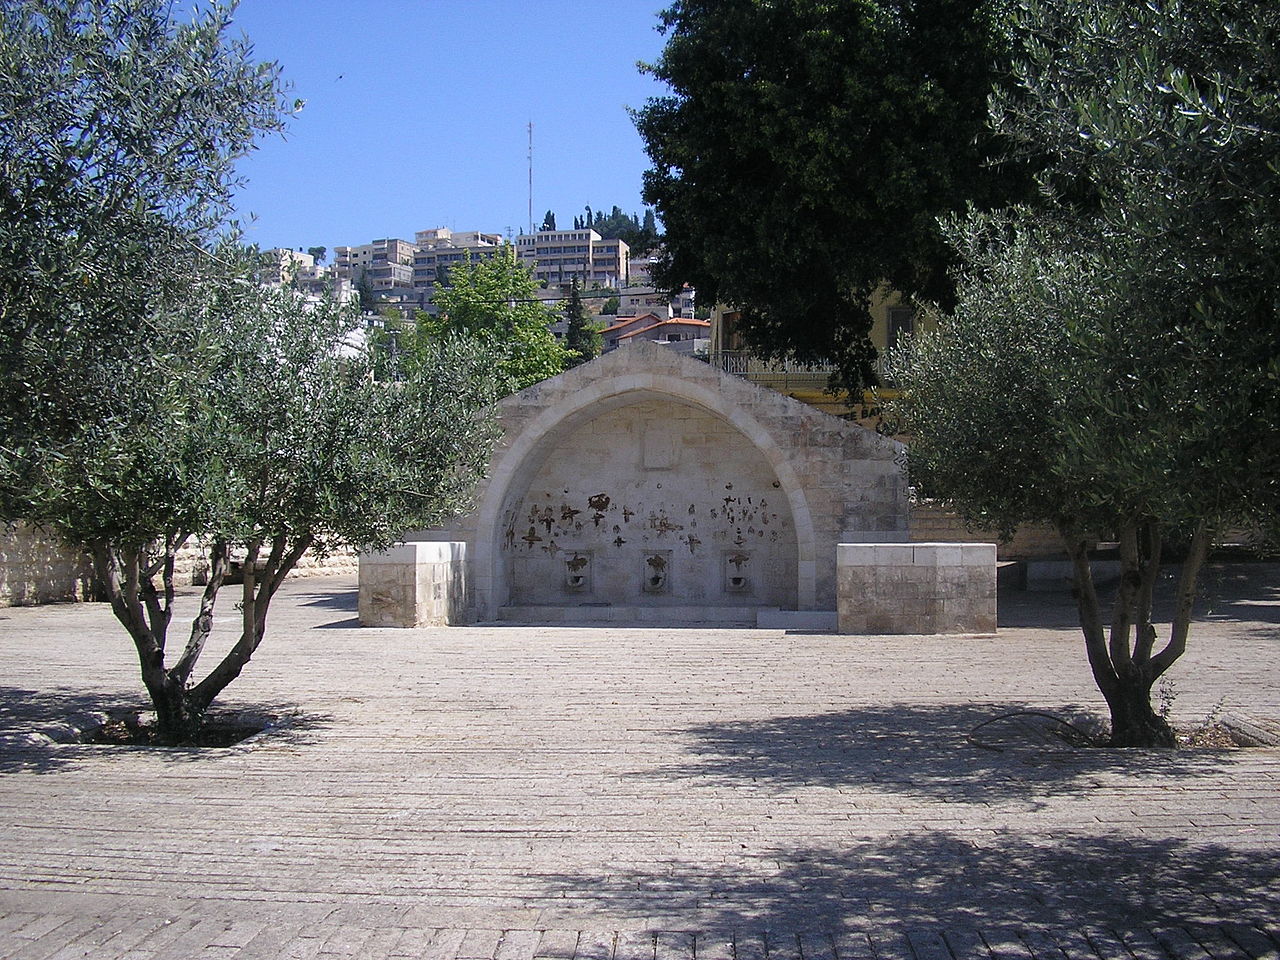 St. Mary's Spring in Nazareth